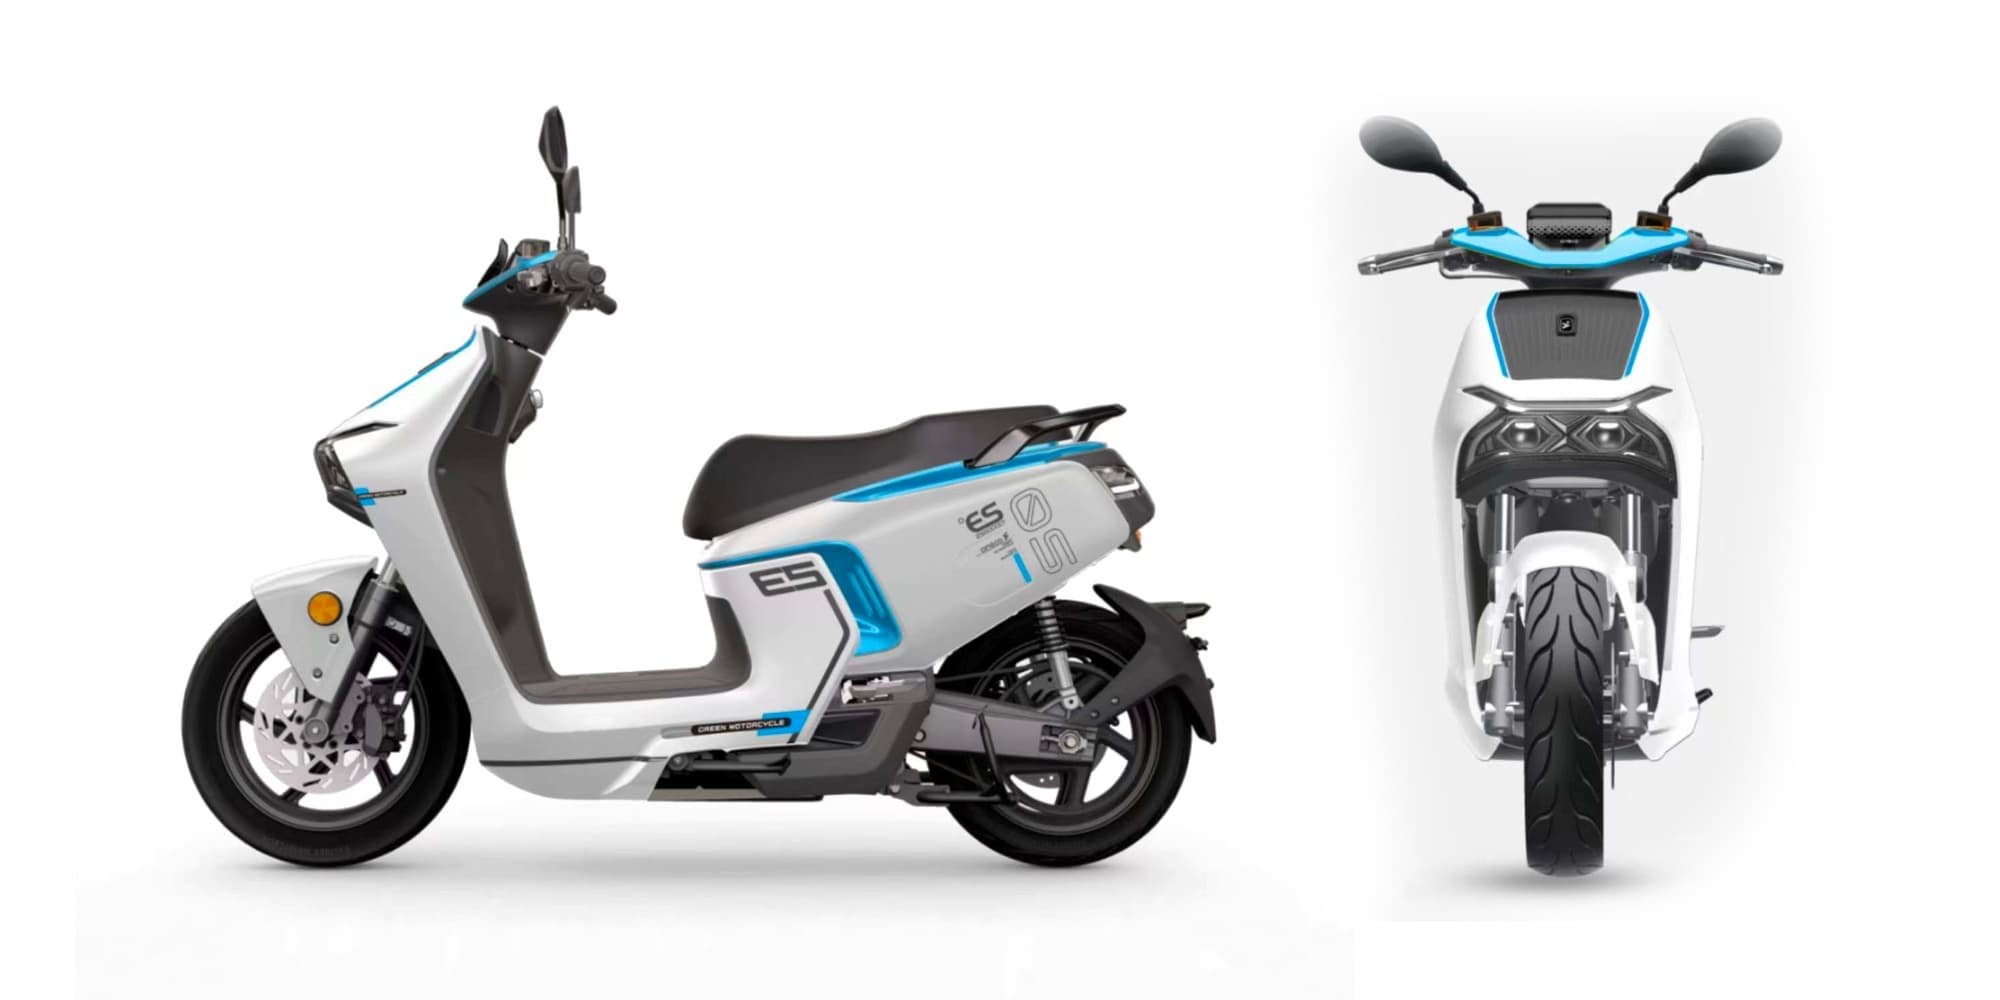 https://electrek.co/wp-content/uploads/sites/3/2023/06/csc-es5-electric-moped-scooter-header.jpg?quality=82&strip=all